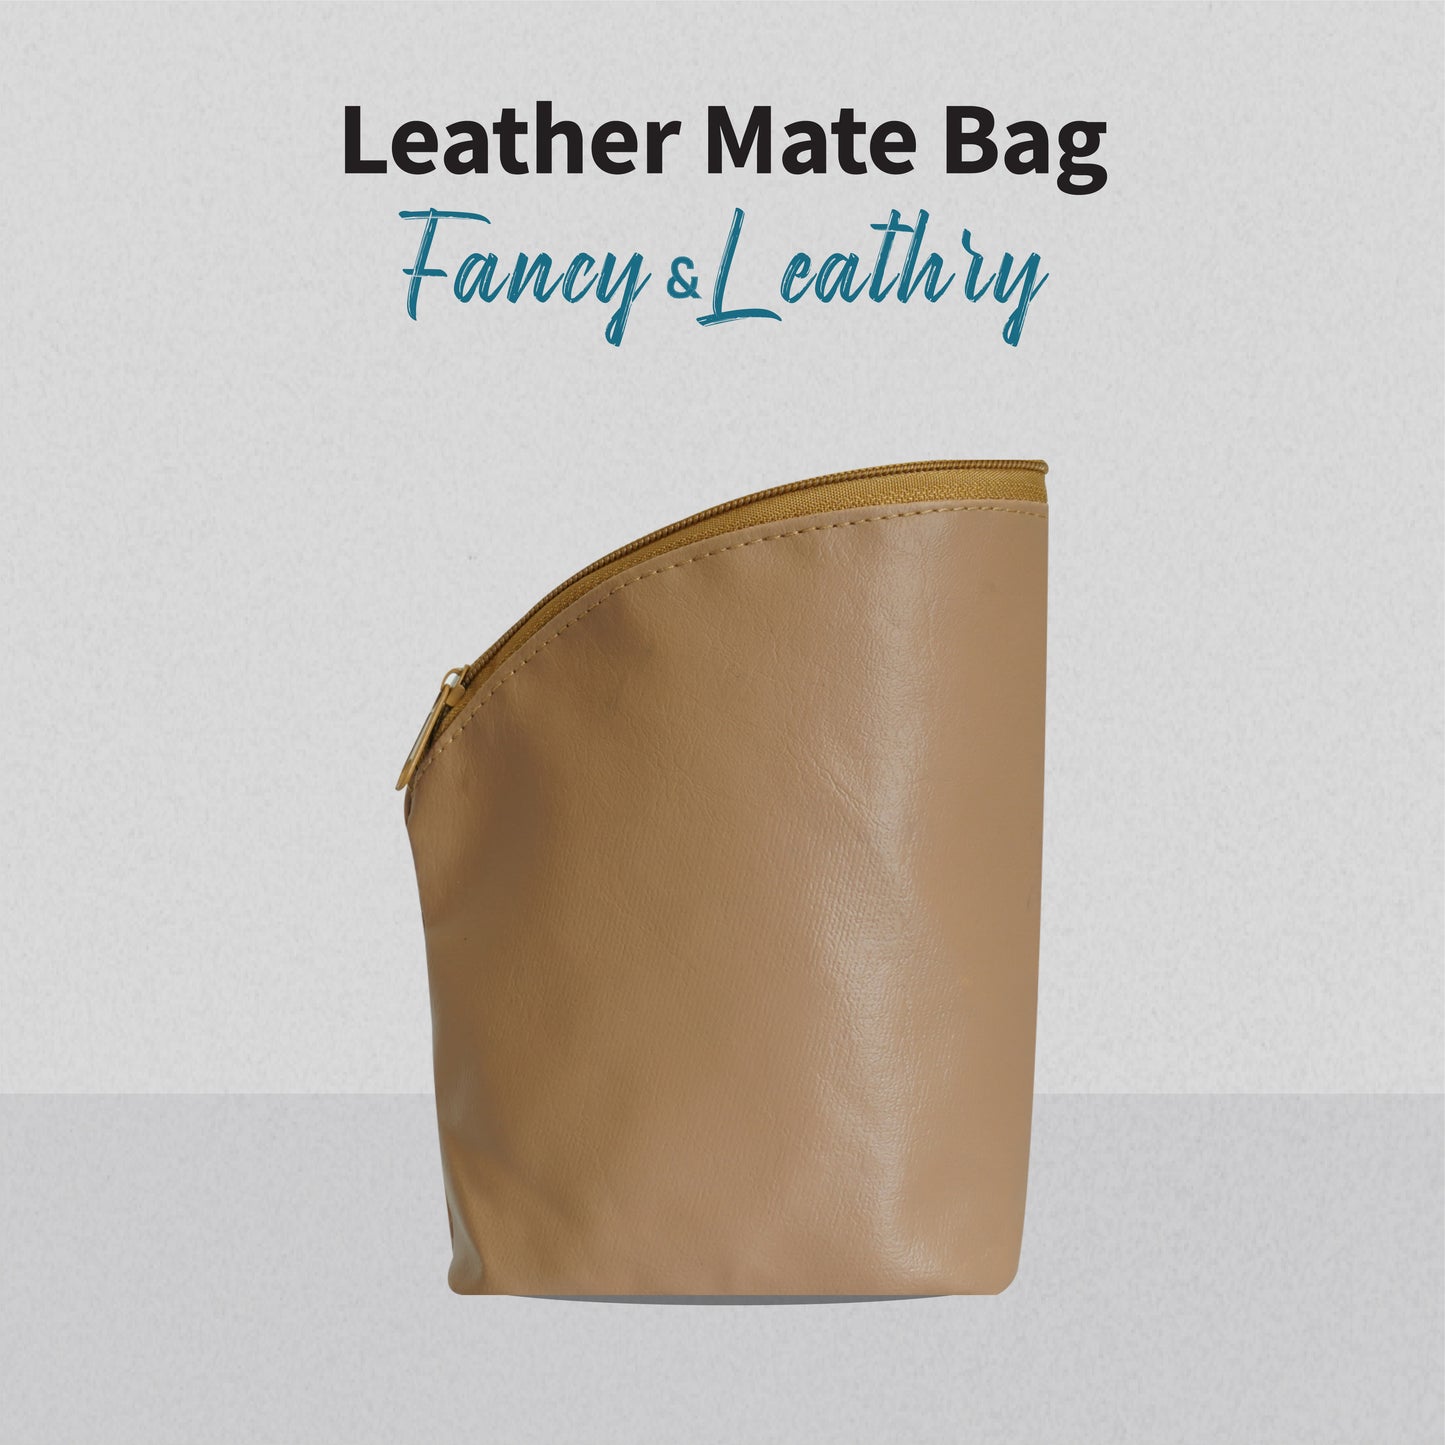 Deluxe Leather Mate Bag and Holder